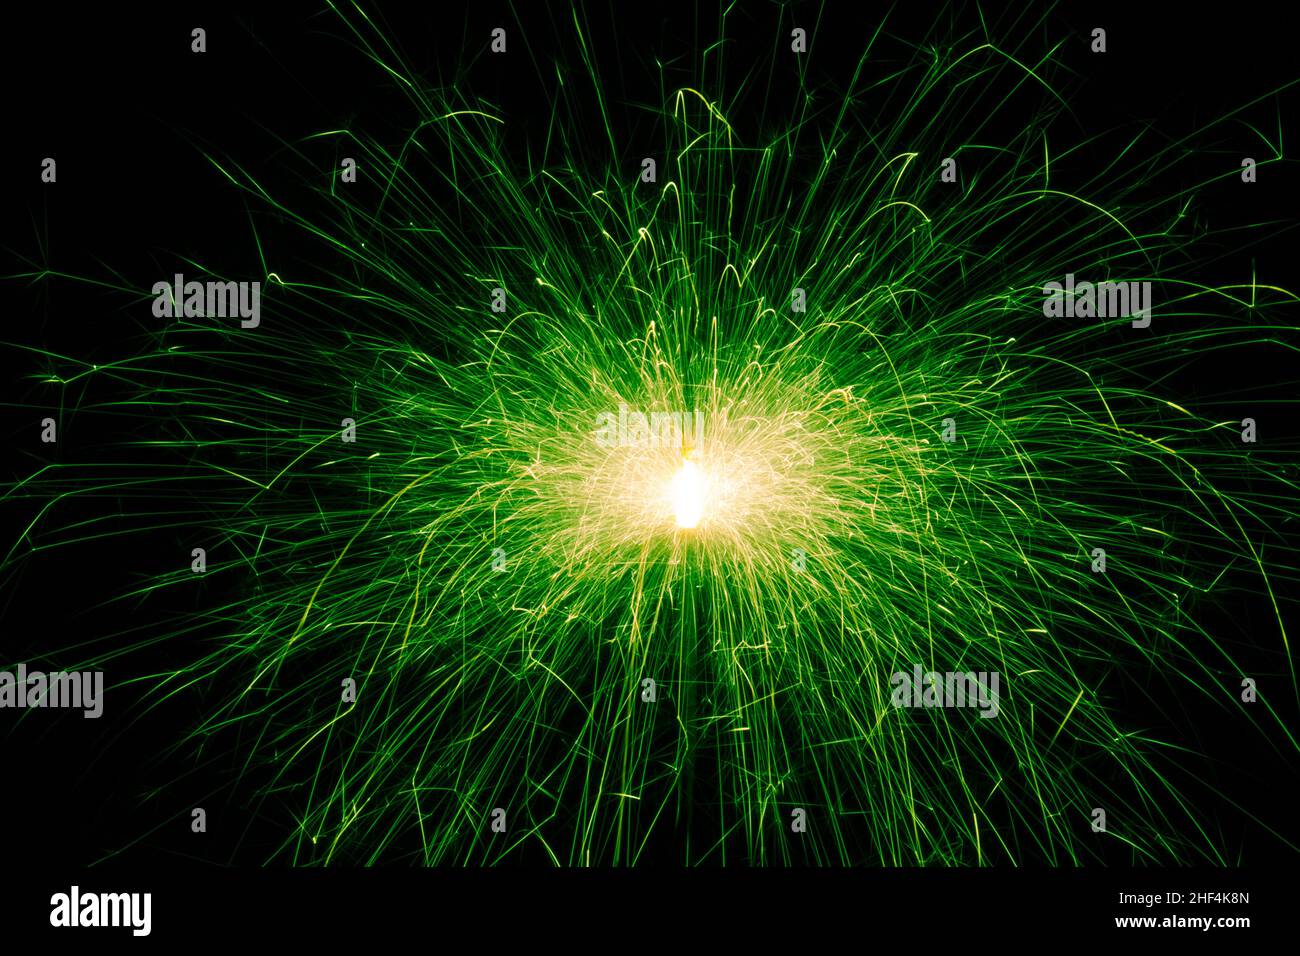 Sparkler, green sparks on a black background. Abstract photo of sparks, holiday lights Stock Photo